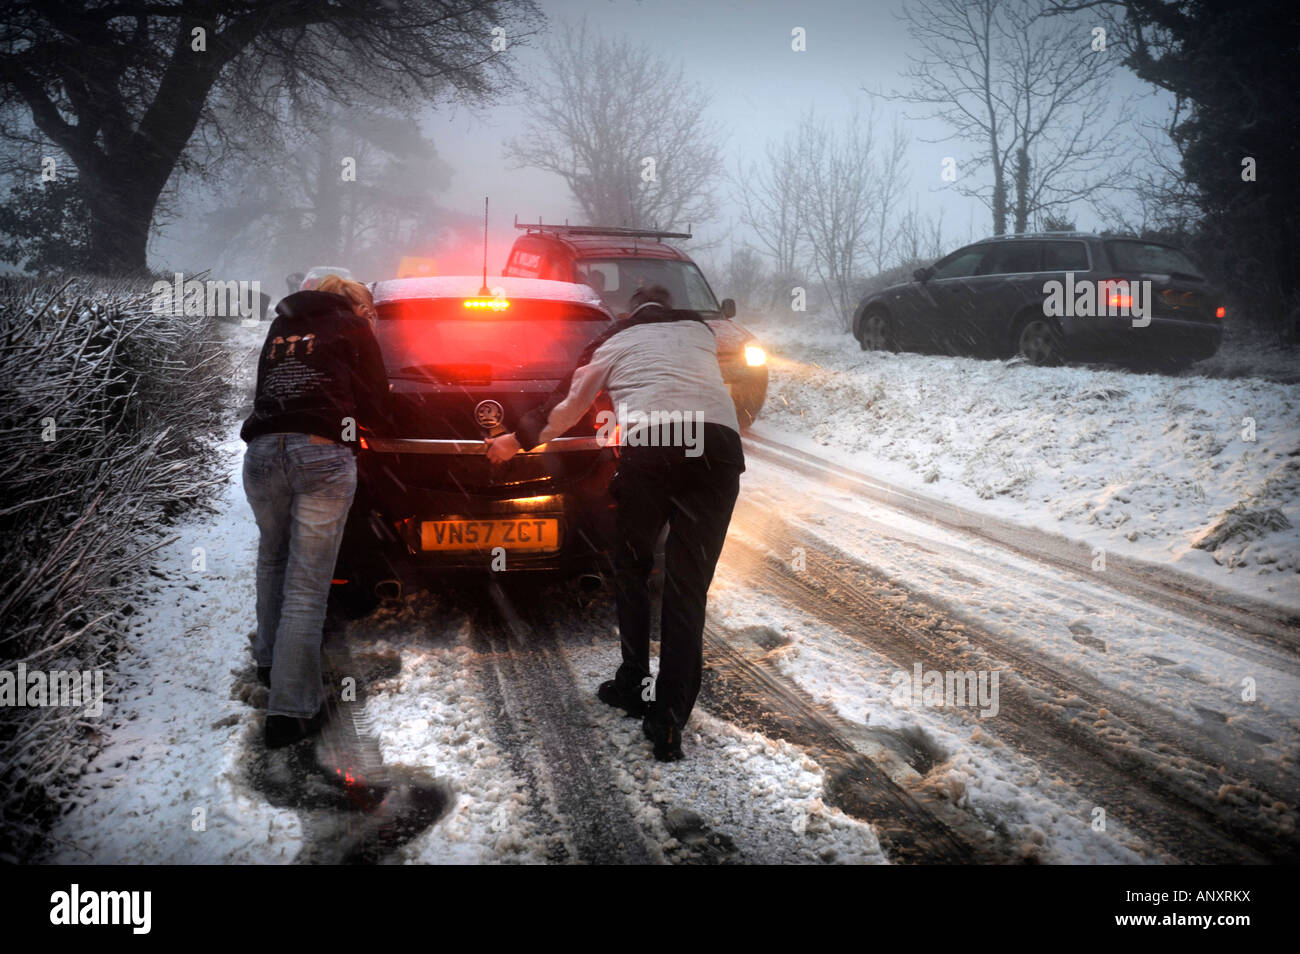 A CAR STUCK IN SNOWY CONDITIONS NEAR WOTTON UNDER EDGE GLOUCESTERSHIRE UK Stock Photo